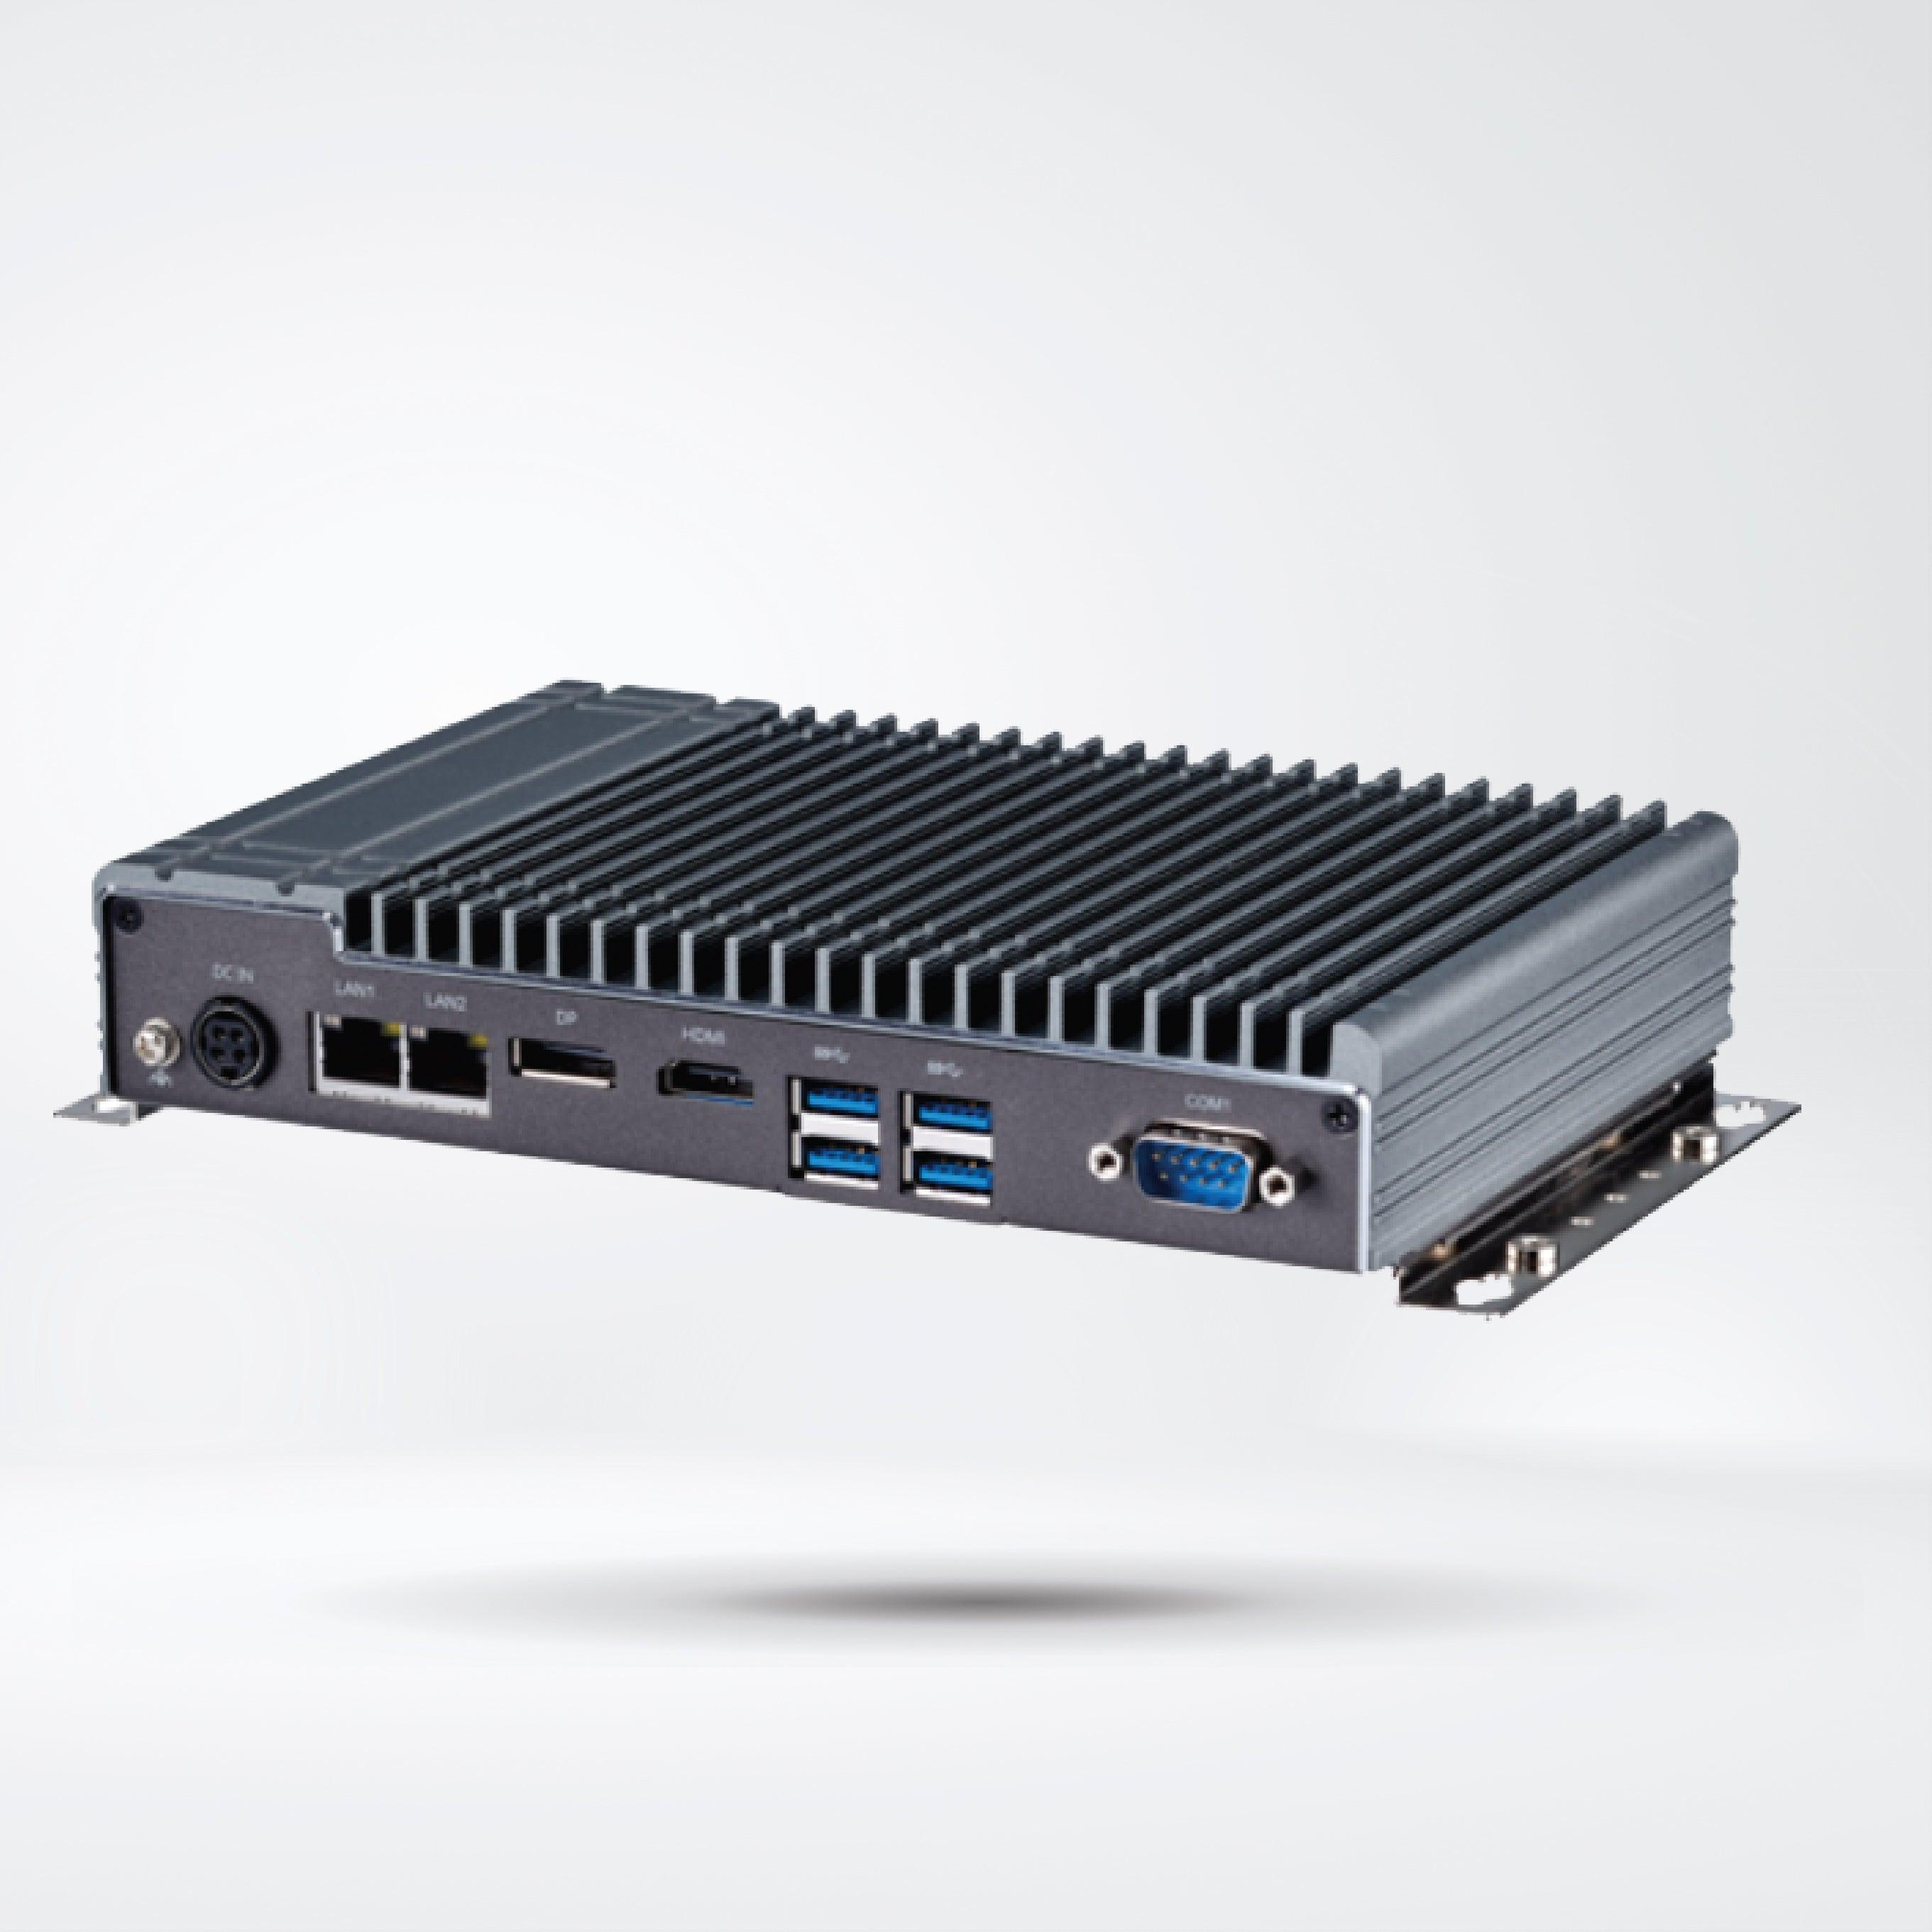 NDiS B360 Fanless Embedded Computer Powered by 11th Generation Intel® Core™ Processor - Riverplus